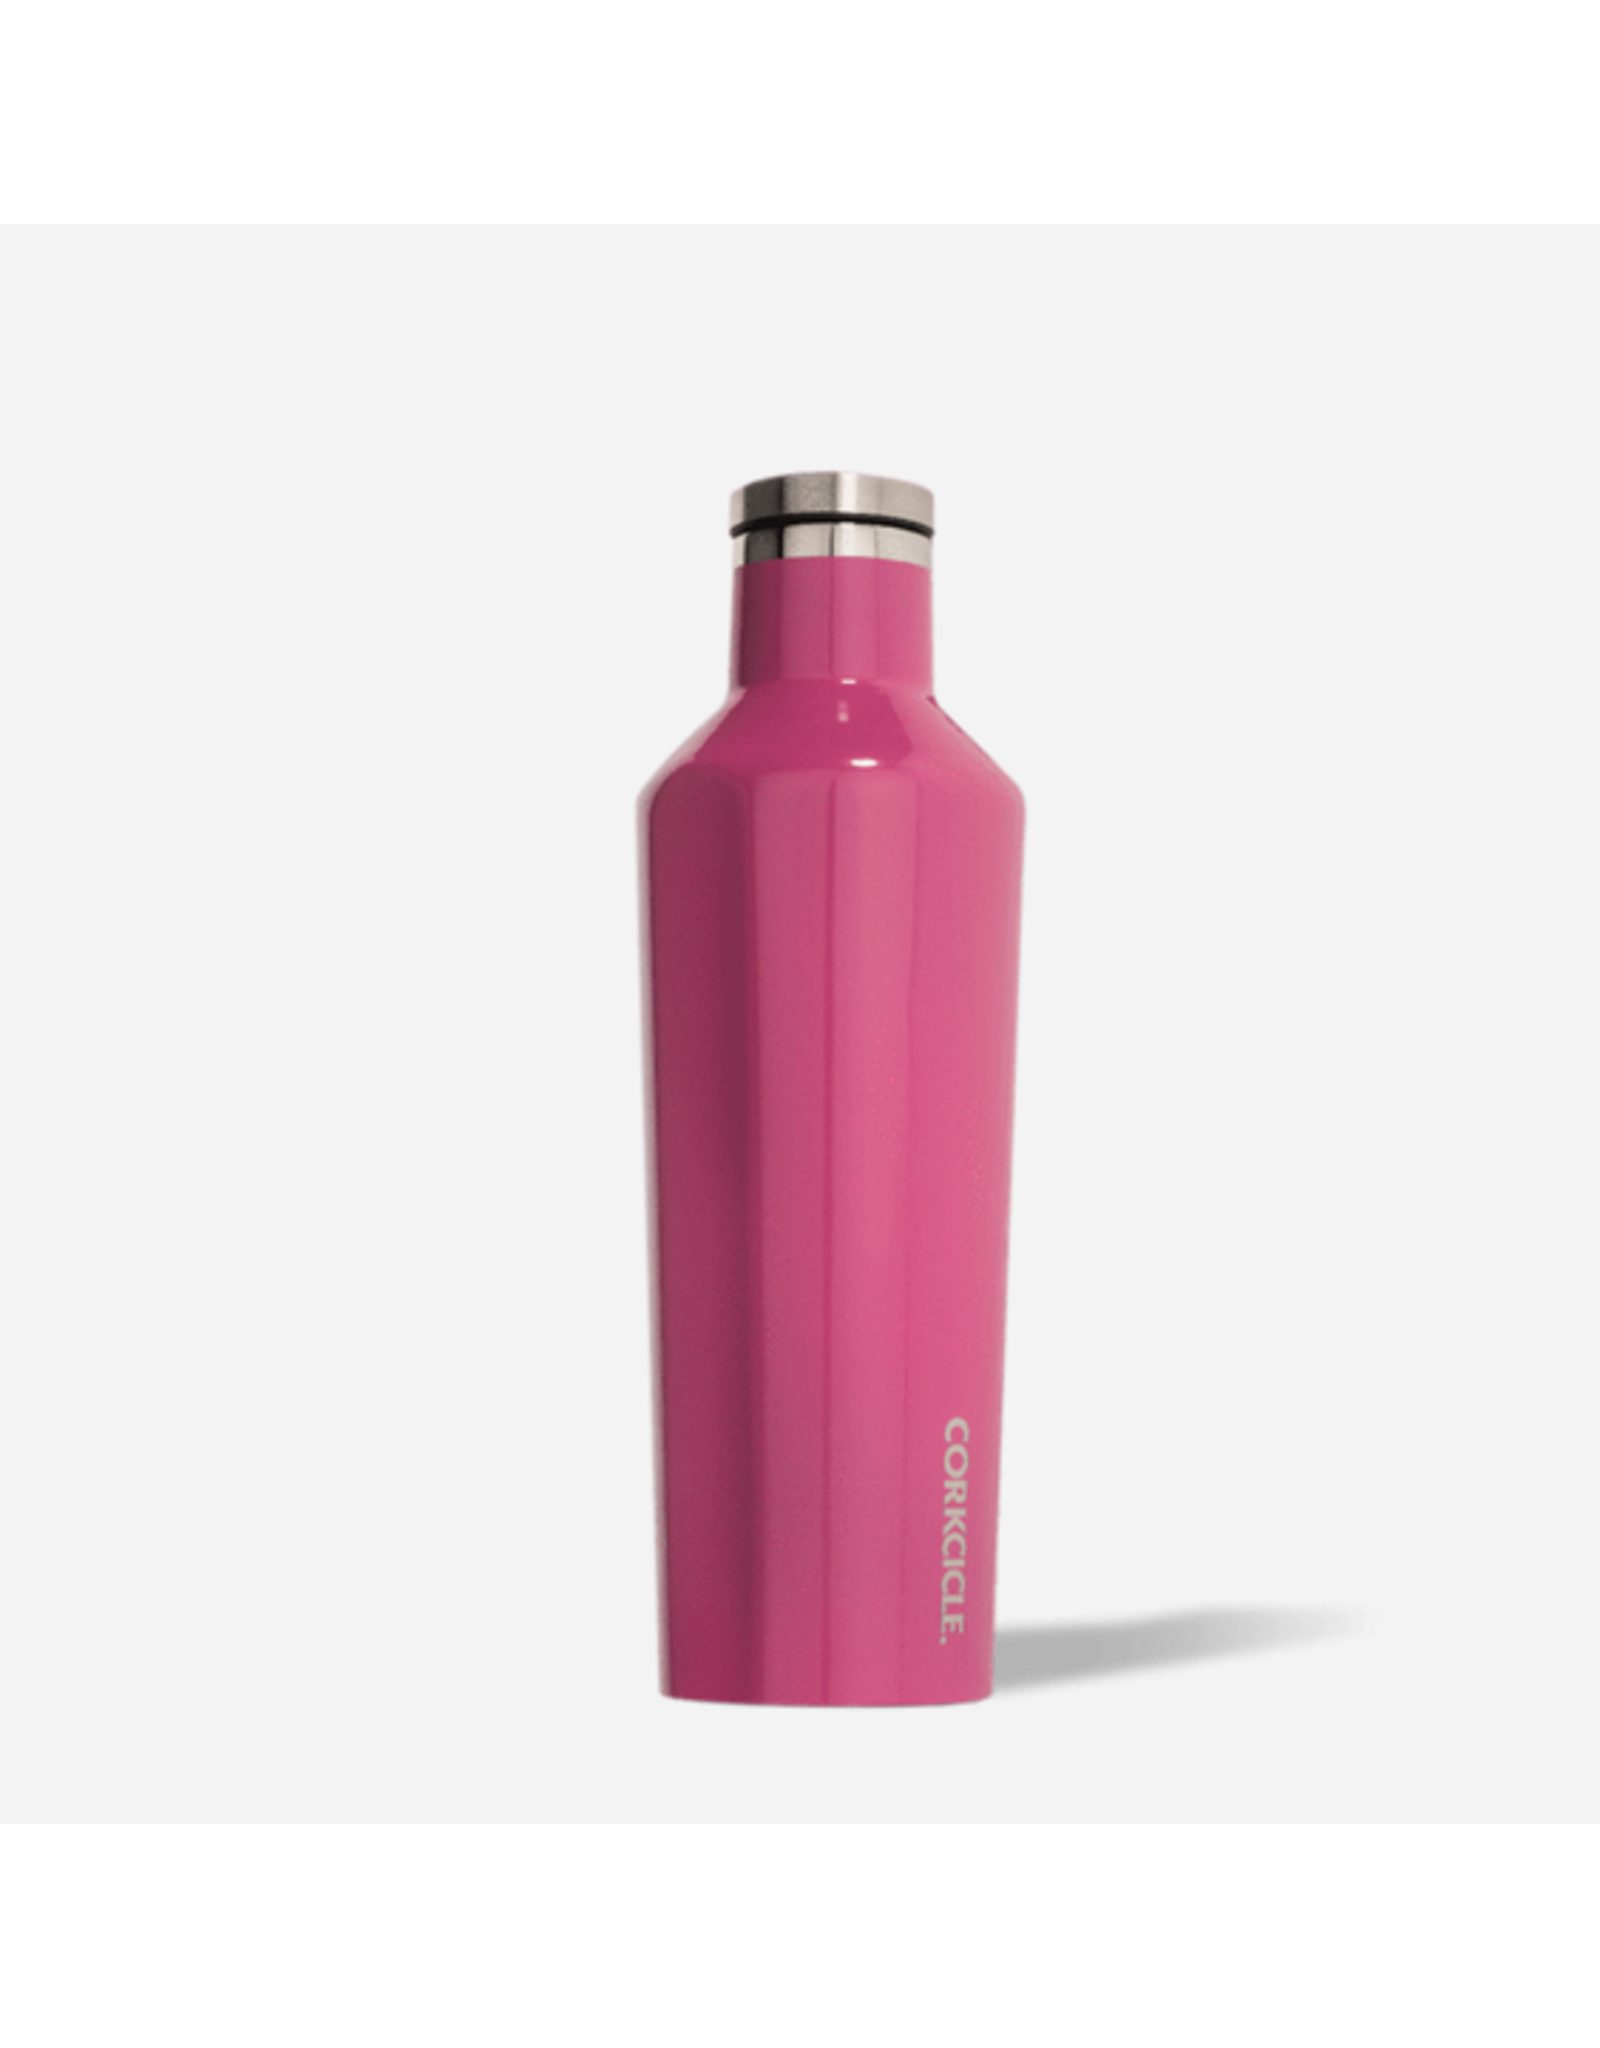 Corkcicle Corkcicle Canteen 16 oz Pink